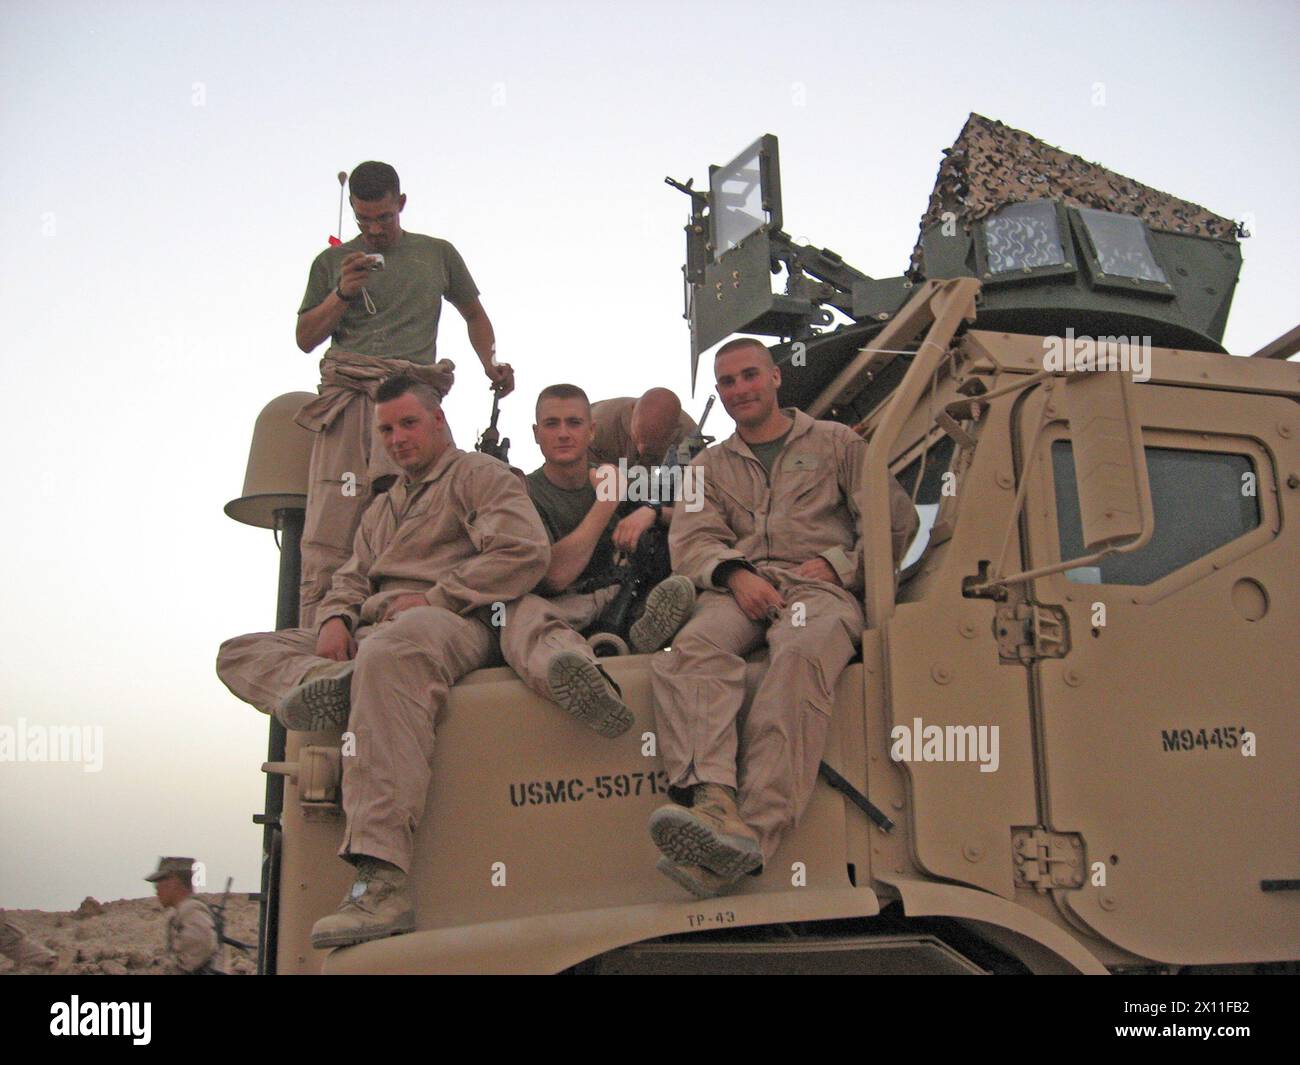 Sgt. Charlie Brown (seated far left), a Data Network Specialist with 2nd Marine Logistics Group (Forward), poses for a photo with the 3rd Machine Gun Squad, Weapons Platoon, Kilo Company, 3rd Battalion, 1st Marine Regiment, during their 2005 deployment to Iraq. Brown was awarded two Purple Heart Medals for wounds received in action on the same day during his deployment. ca. 2005 Stock Photo